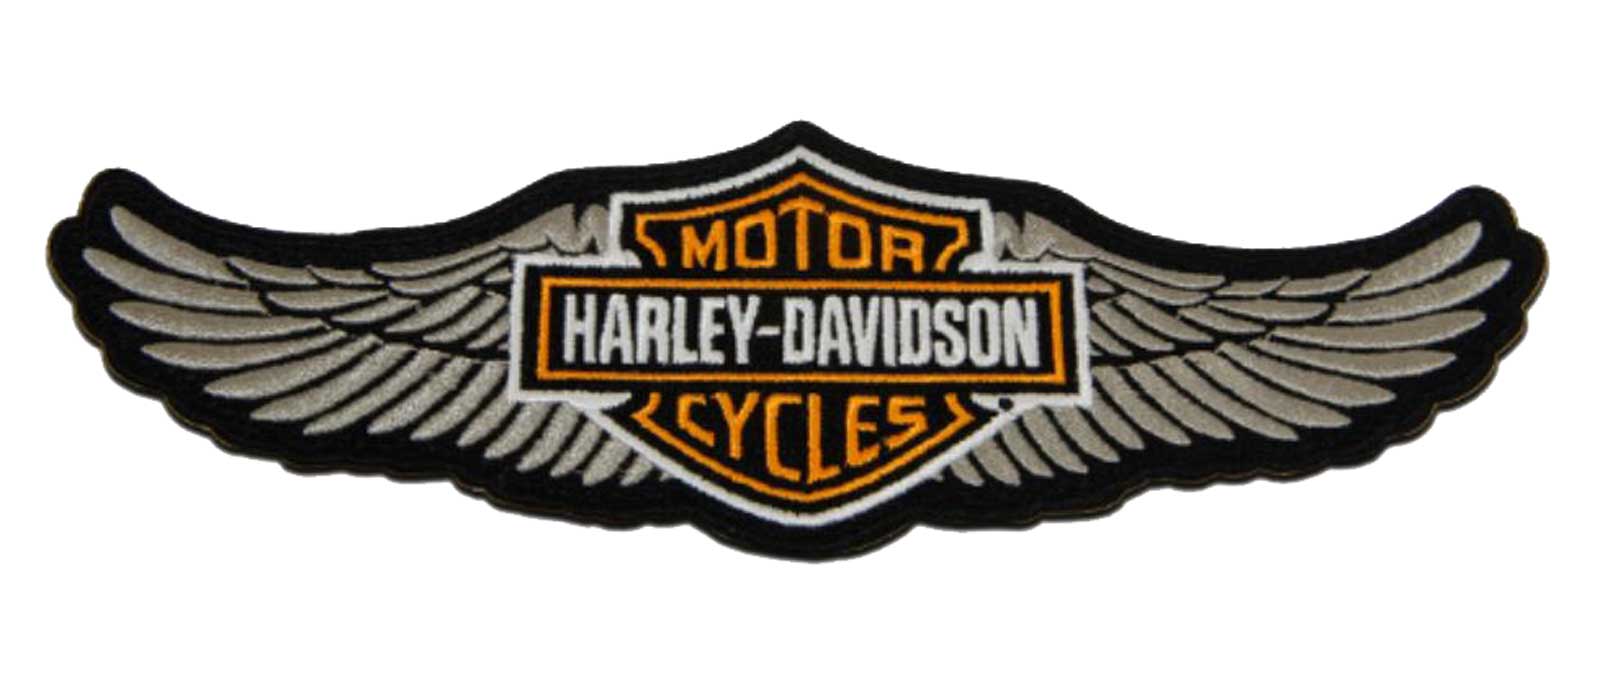 Harley Davidson - Patch - Back Patches - Patch Keychains Stickers -   - Biggest Patch Shop worldwide